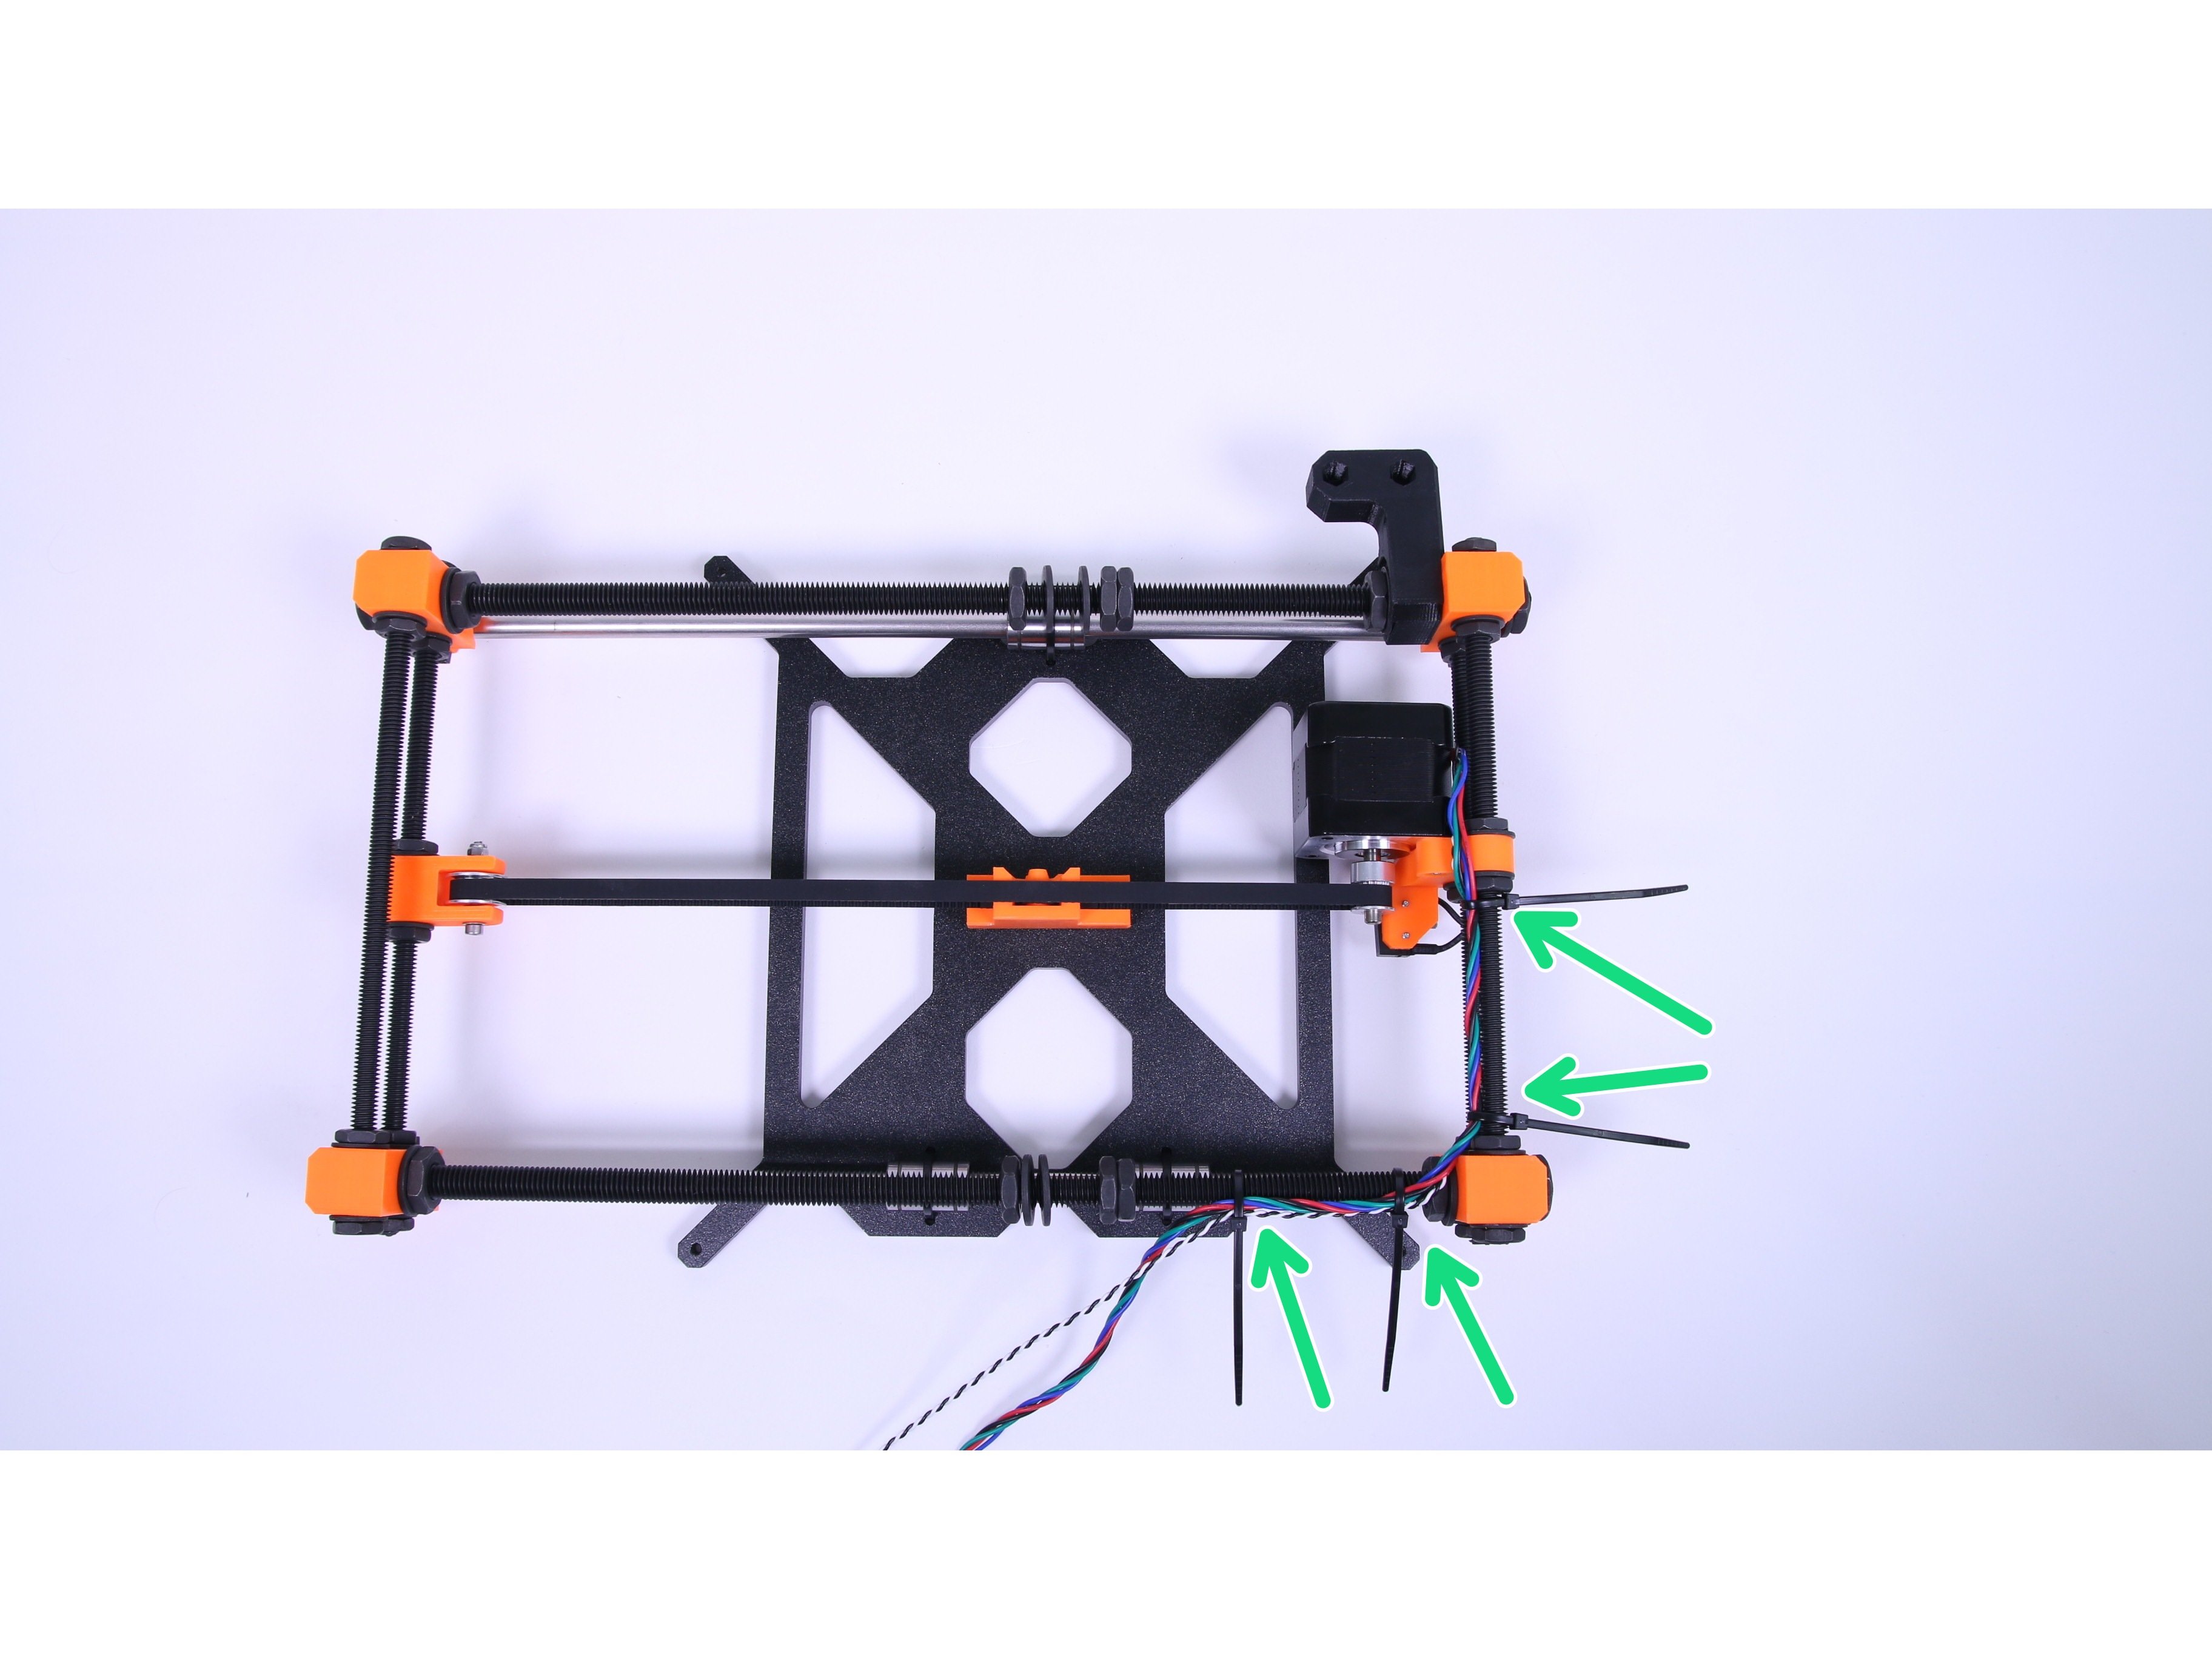 Y-axis stage cable management